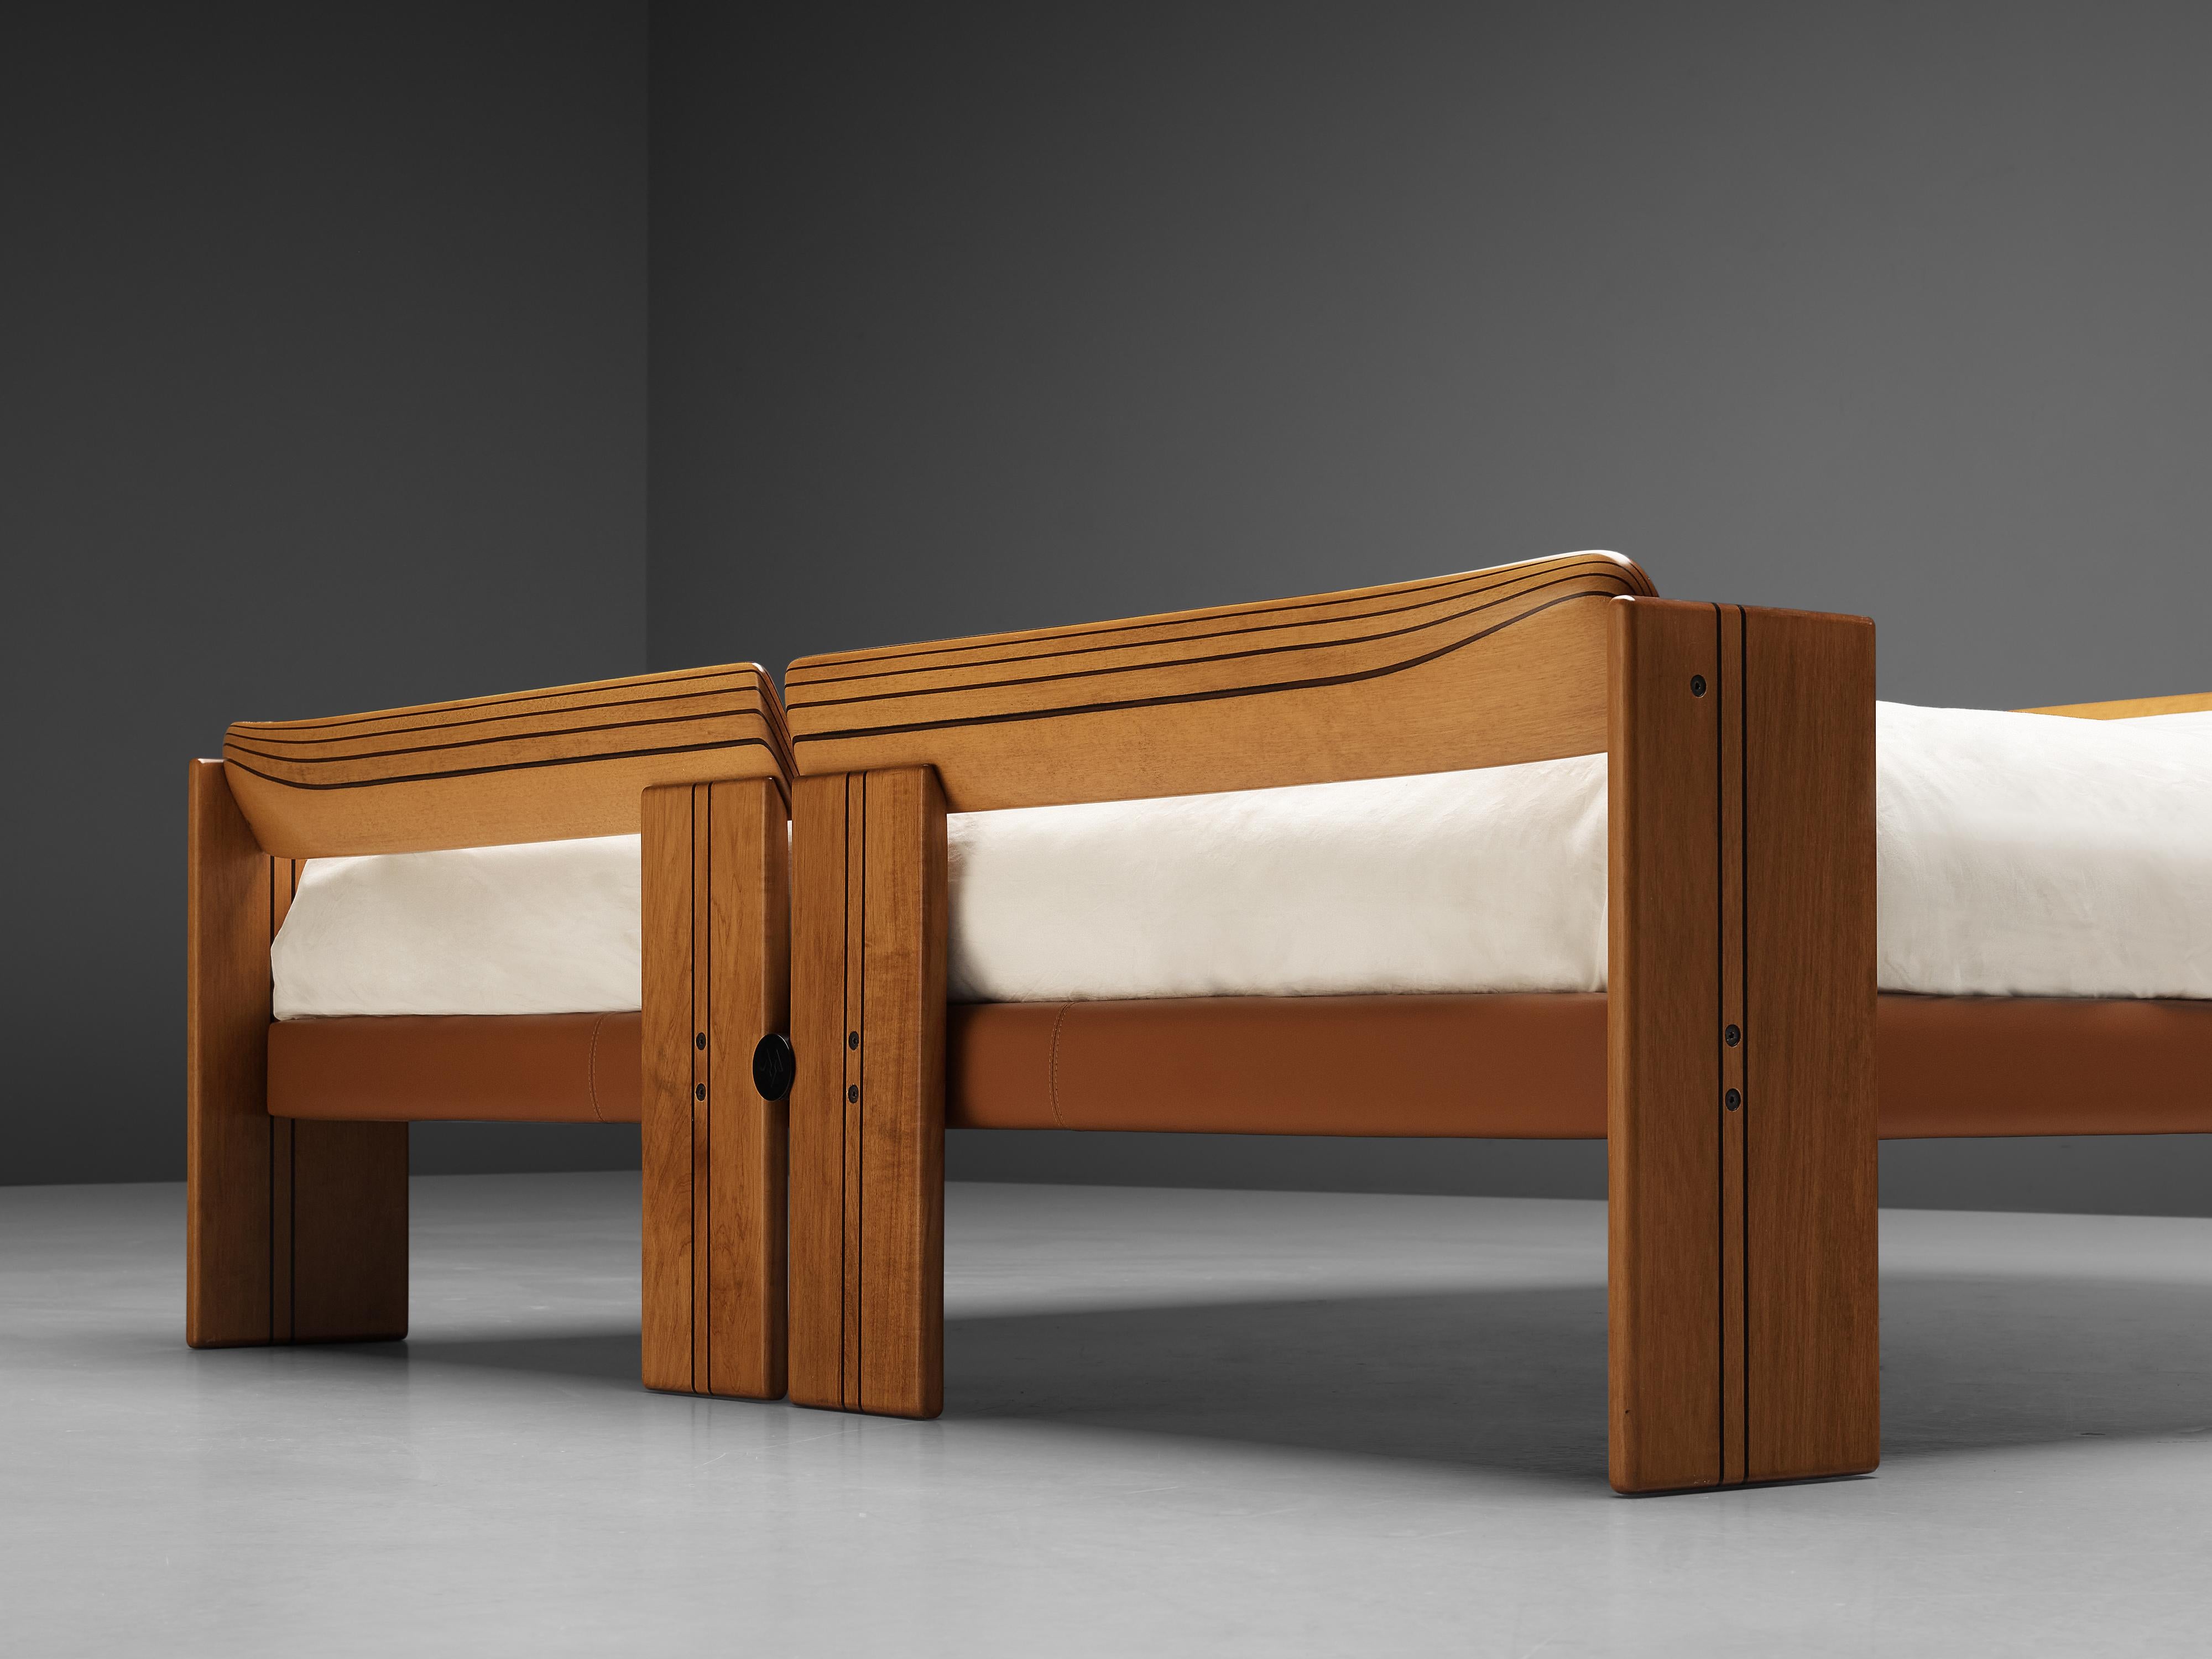 Mid-Century Modern Afra & Tobia Scarpa 'Artona' Bed in Walnut and Leather